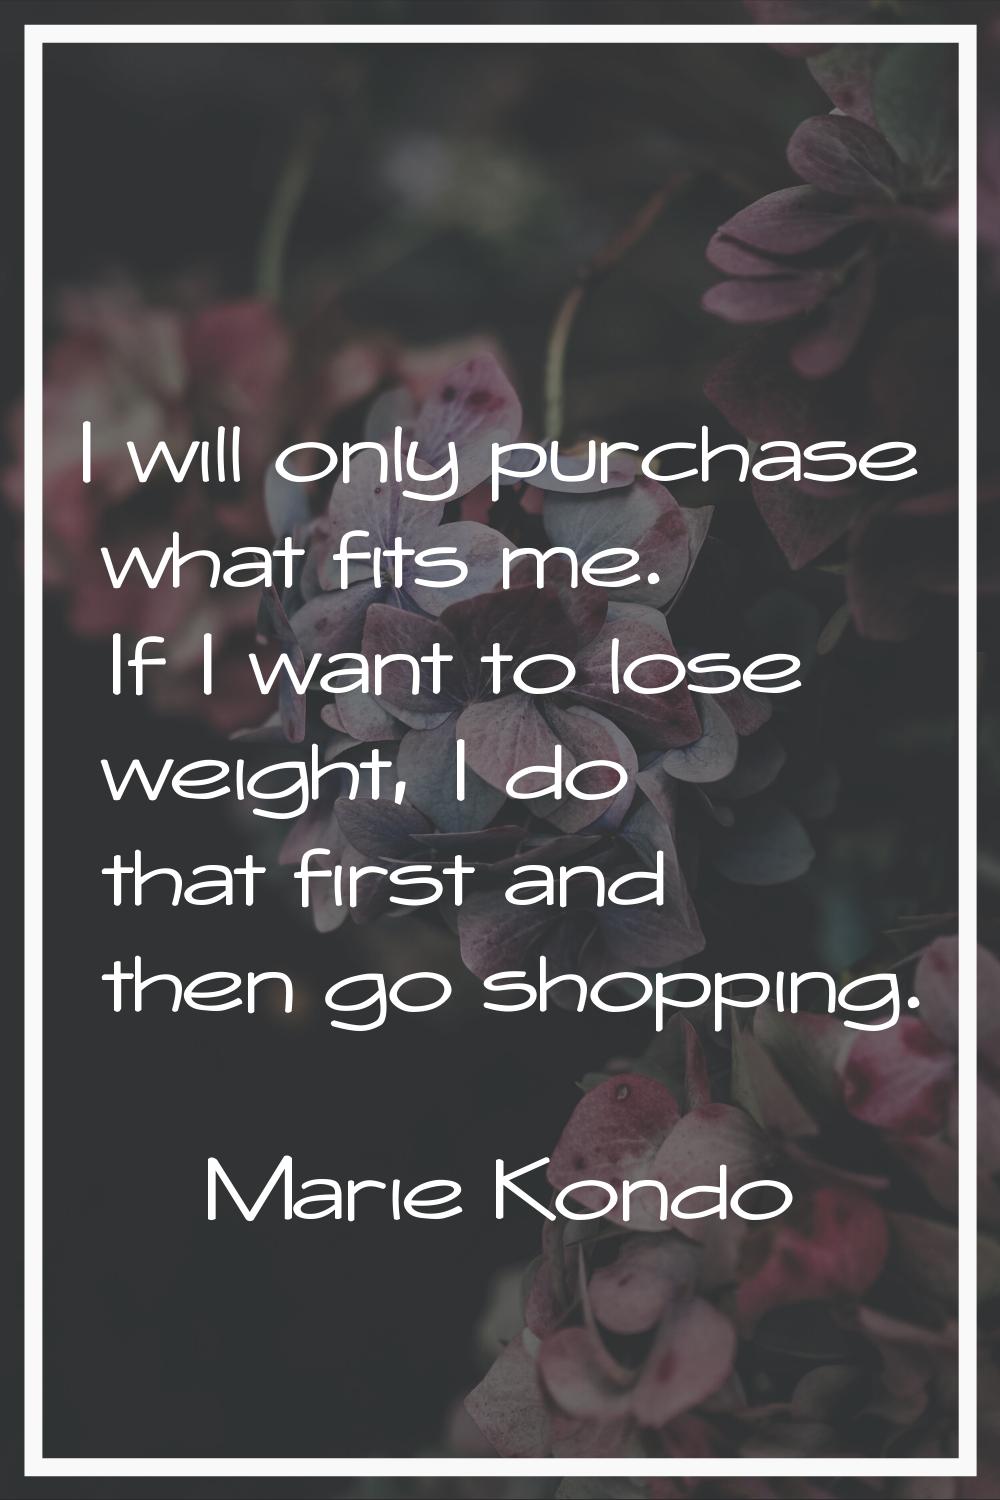 I will only purchase what fits me. If I want to lose weight, I do that first and then go shopping.